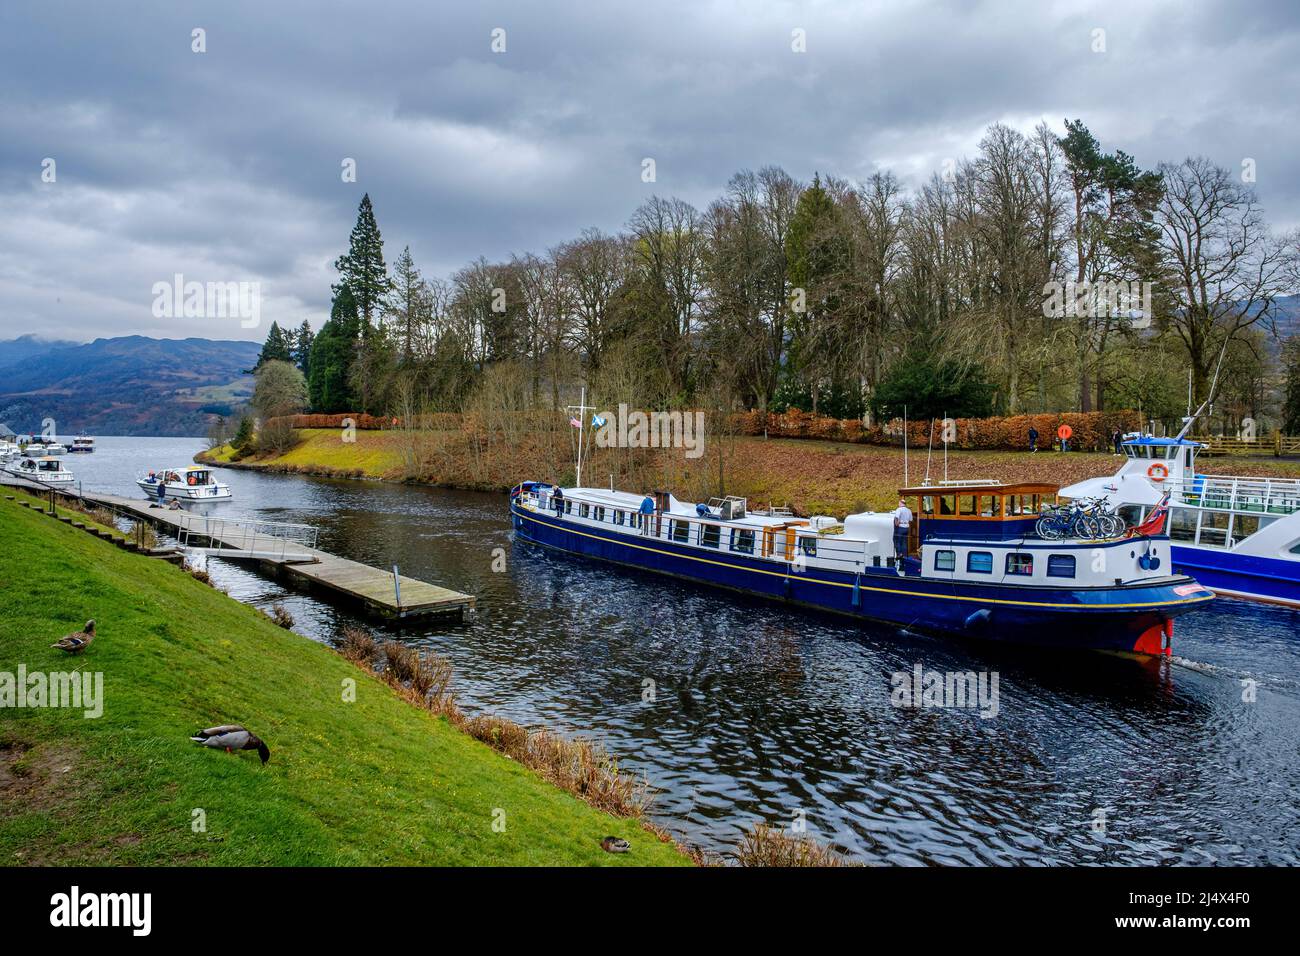 The tourist cruiser Scottish Highlander making its way through the Caledonian Canal and into Loch Ness, Scotland Stock Photo